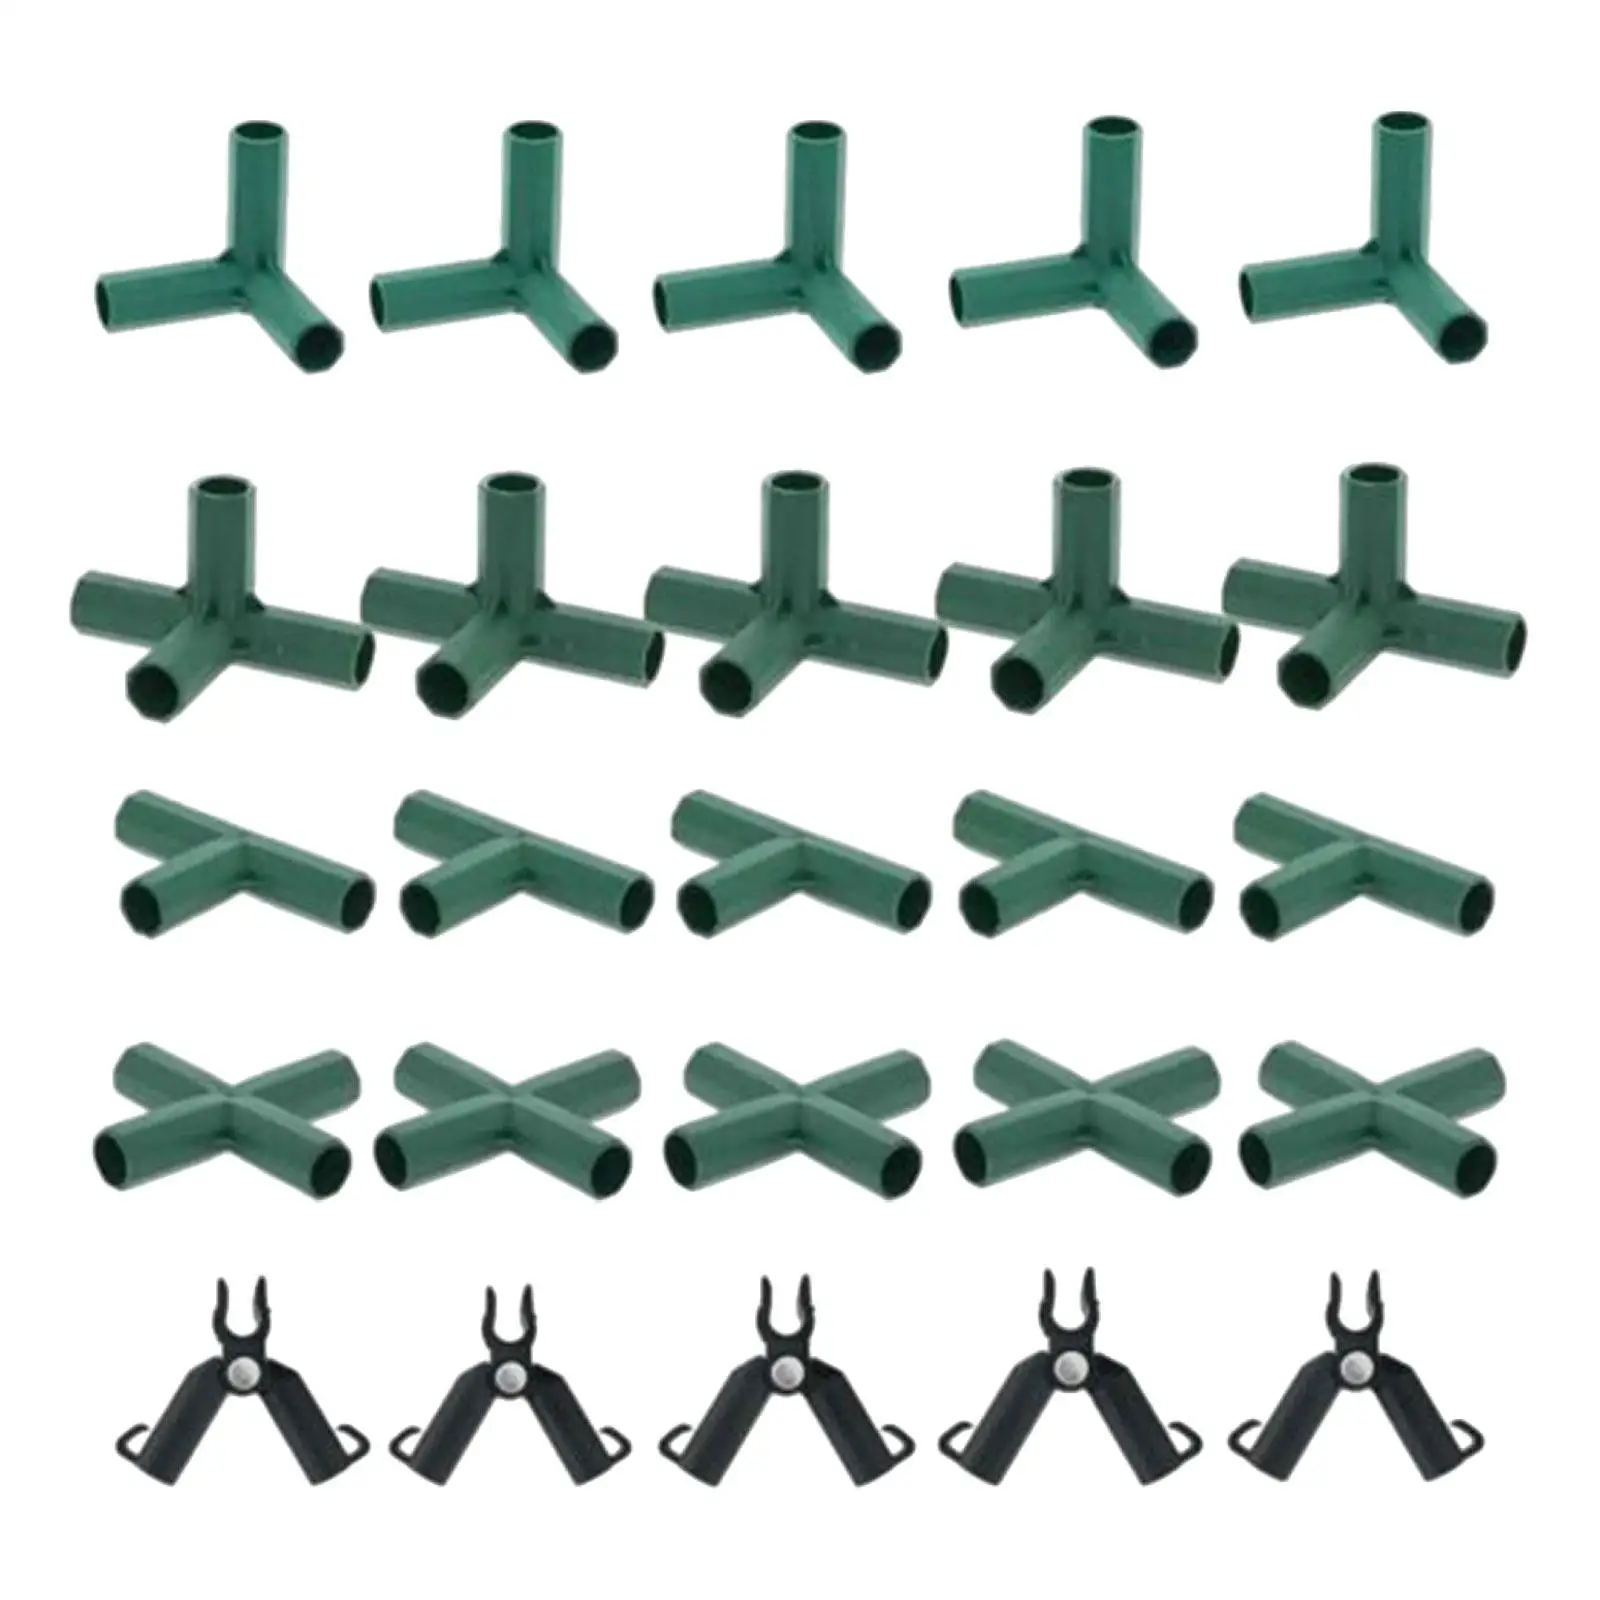 20Pcs Heavy Duty Greenhouse Frame Connector 5 Types Gardening Frame Joints Pole Connector for Gardening Grape Trellis